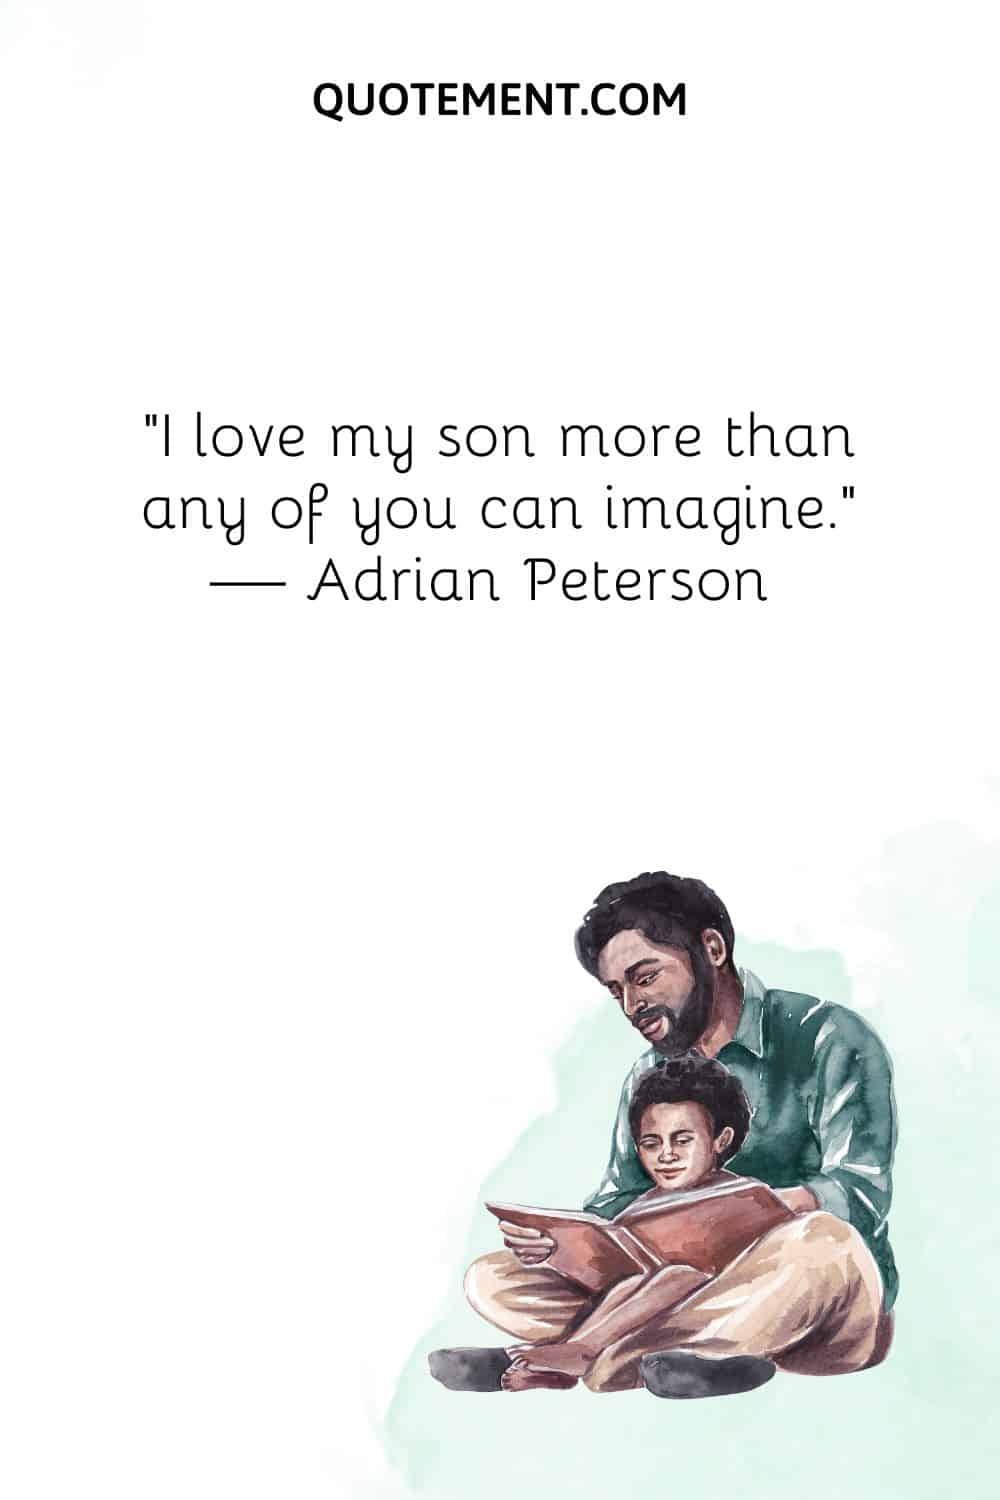 father and son reading image representing quote about love for sons